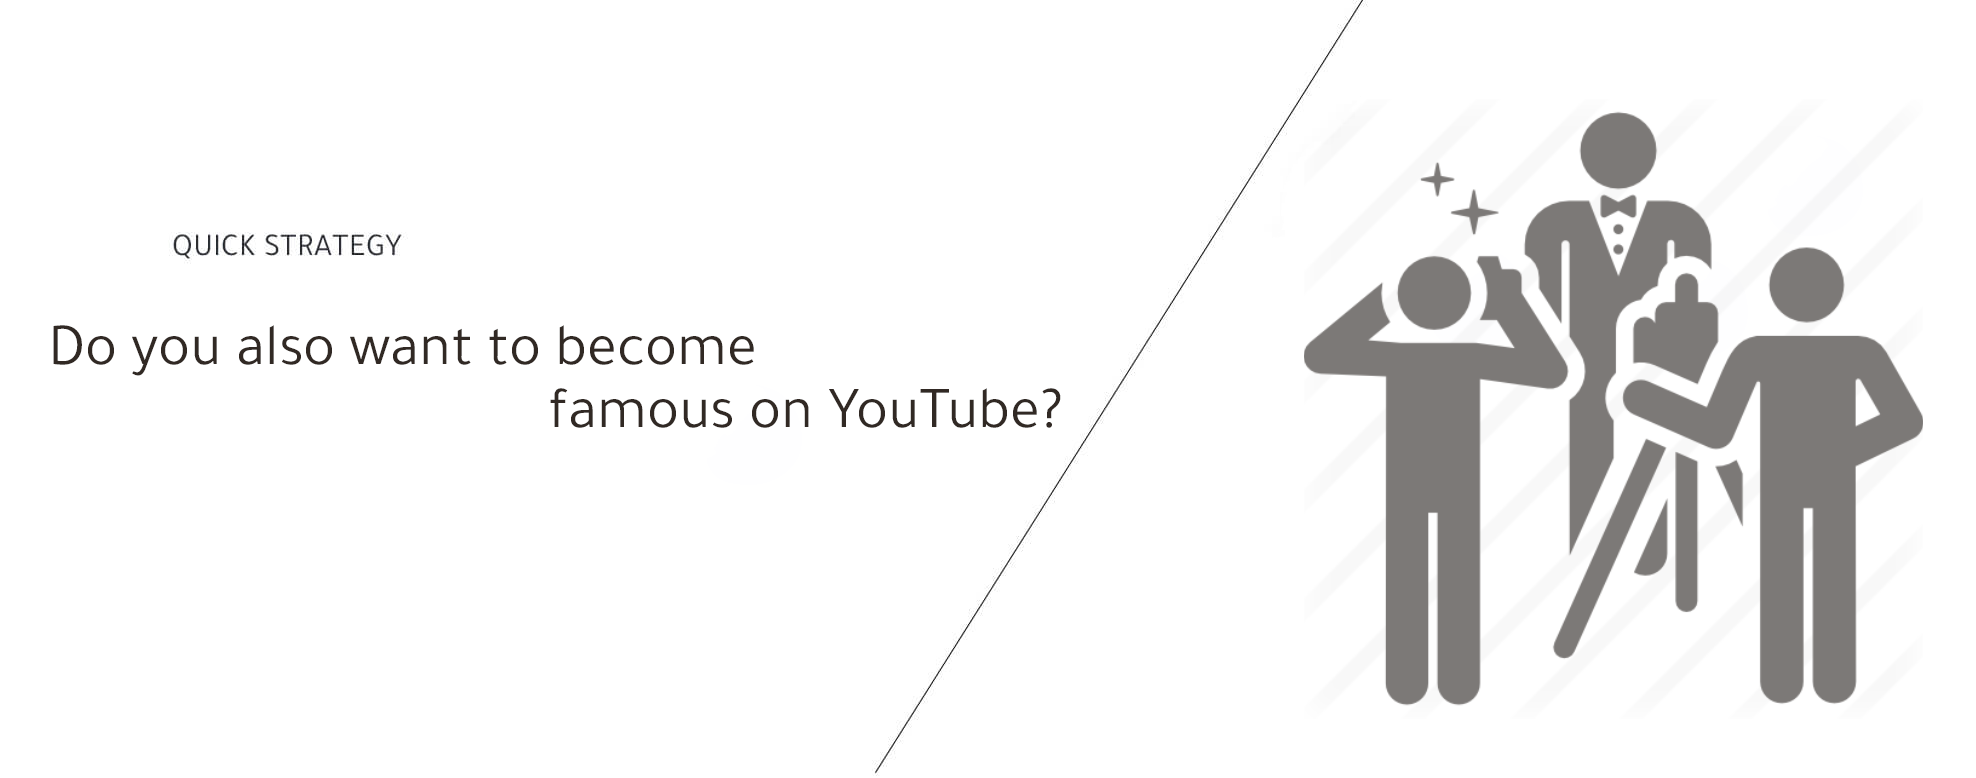 Do you also want to become famous on YouTube?